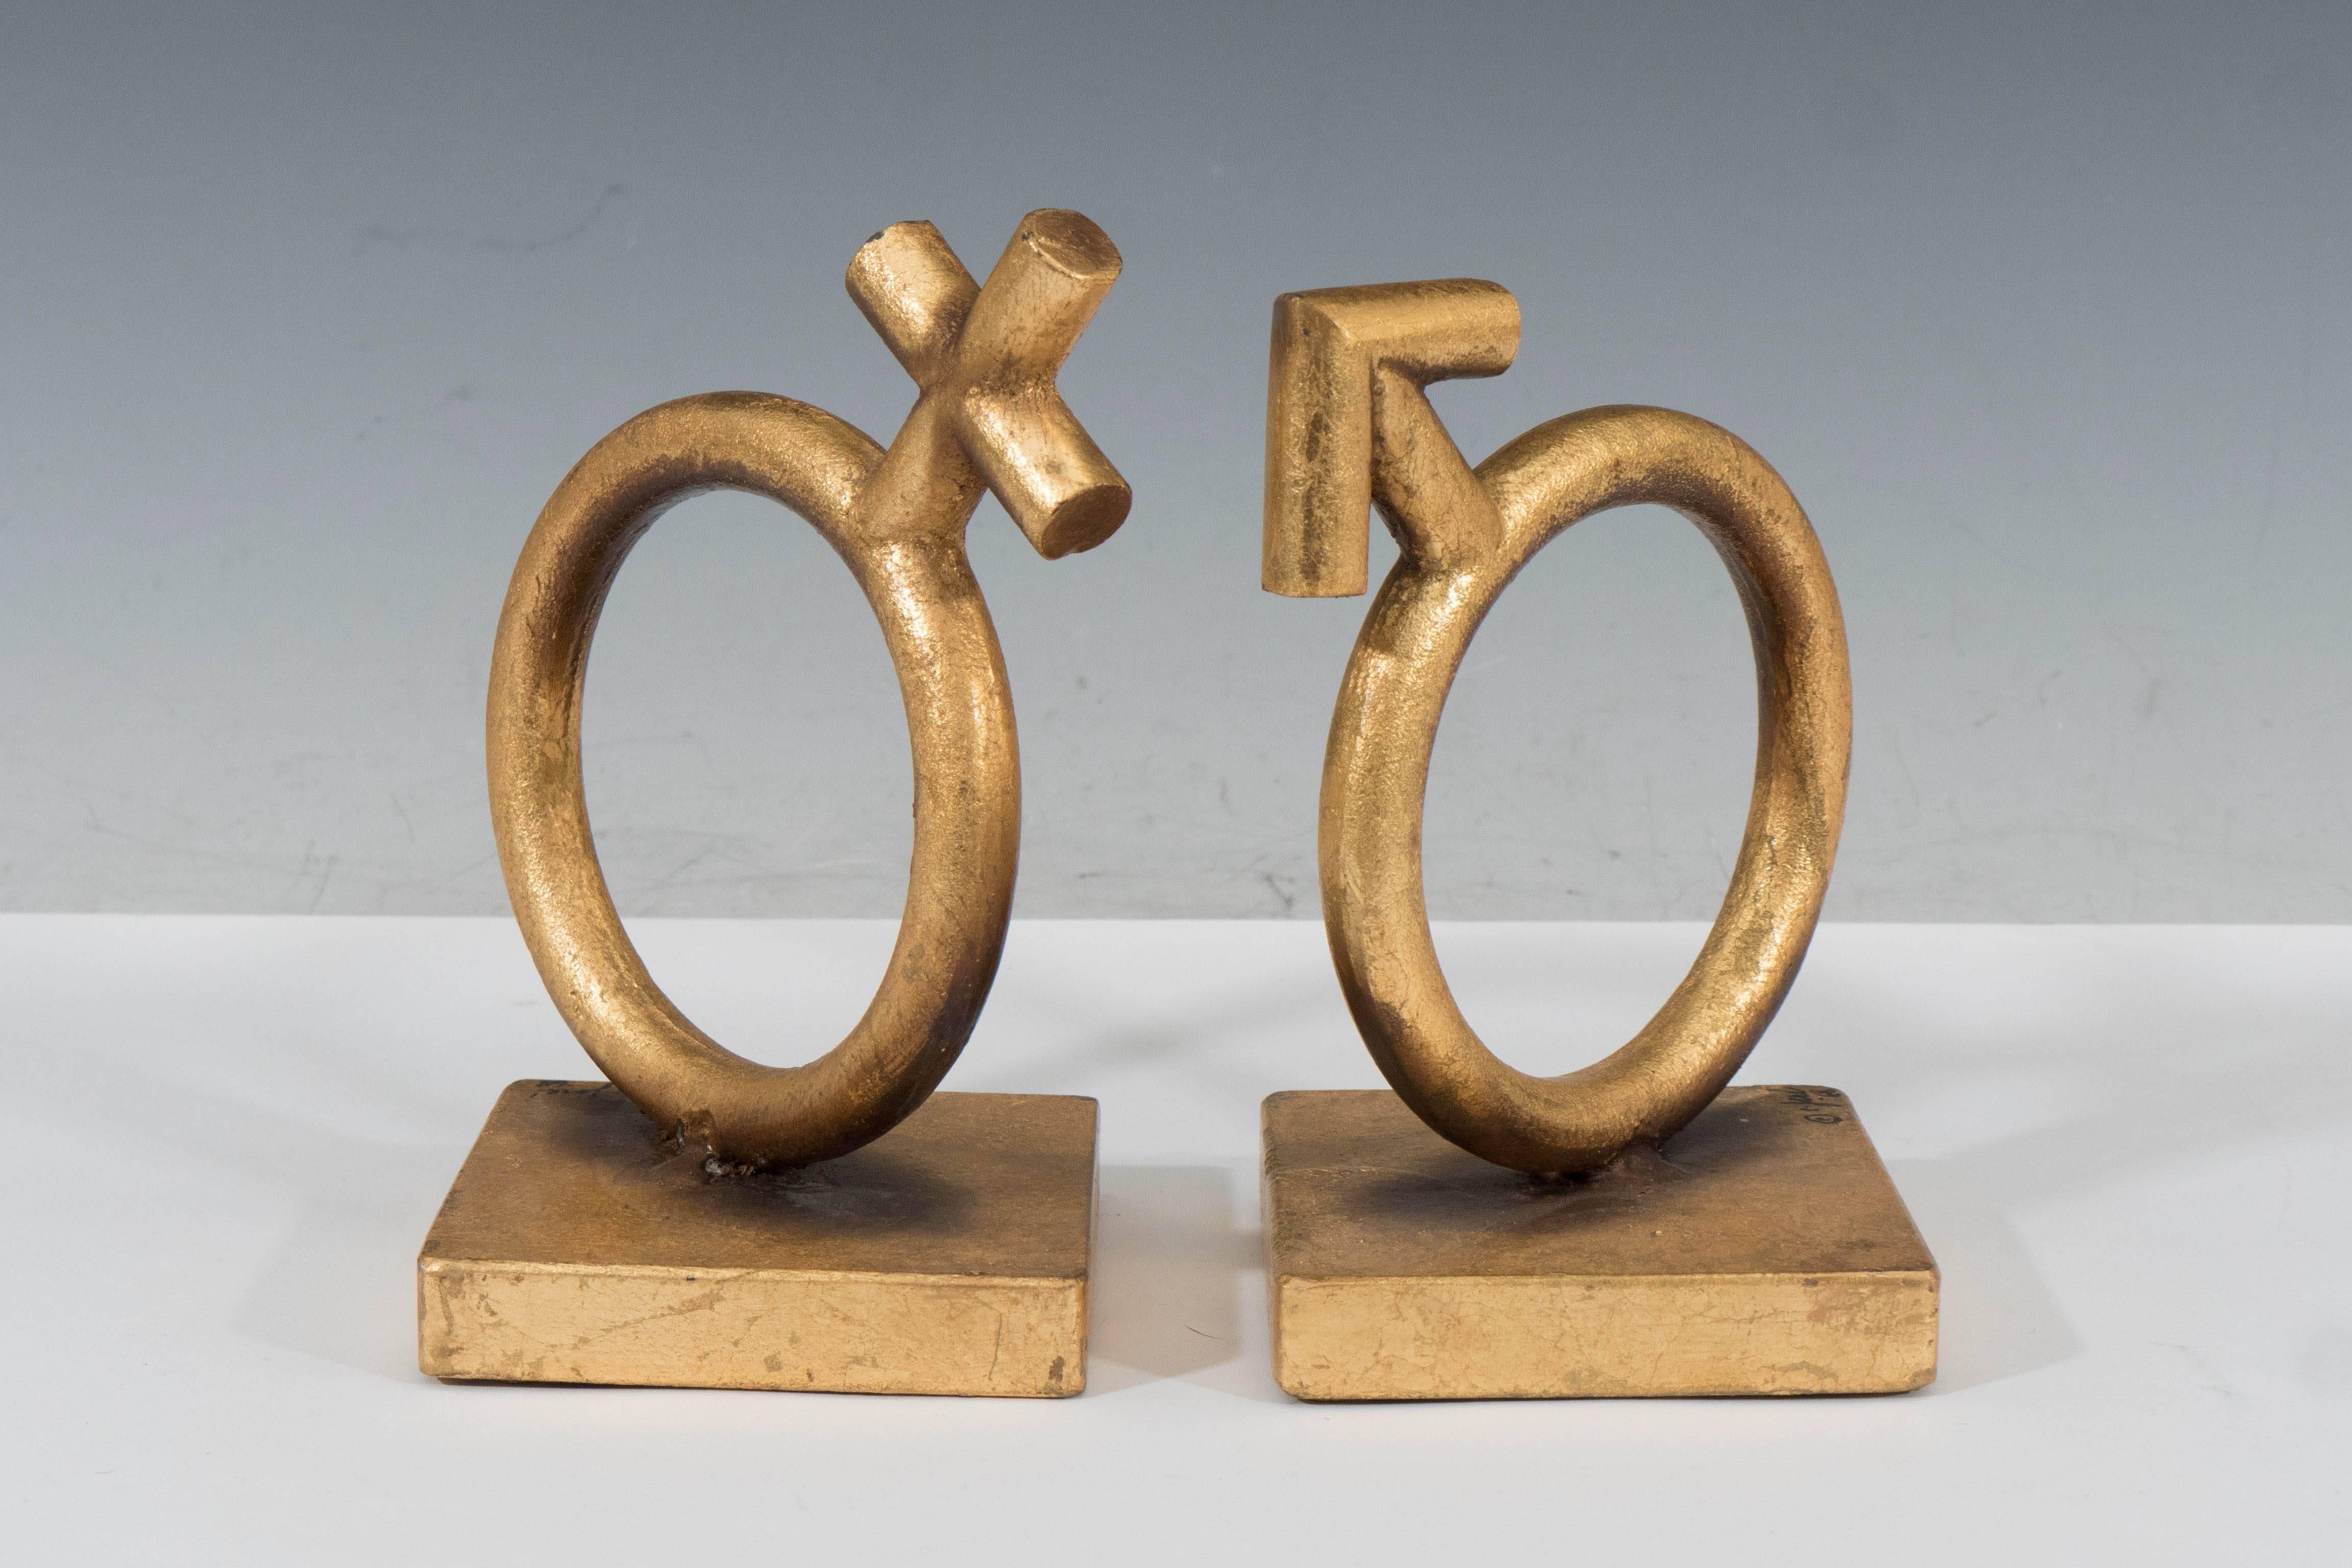 A pair of vintage Curtis Jere sculptural bookends, entitled 'The Sexes', either depicting the male and female gender symbols on square bases, in gold gilt metal. Markings include signature [© C. Jere/1968], signed to the corner bases of both pieces.